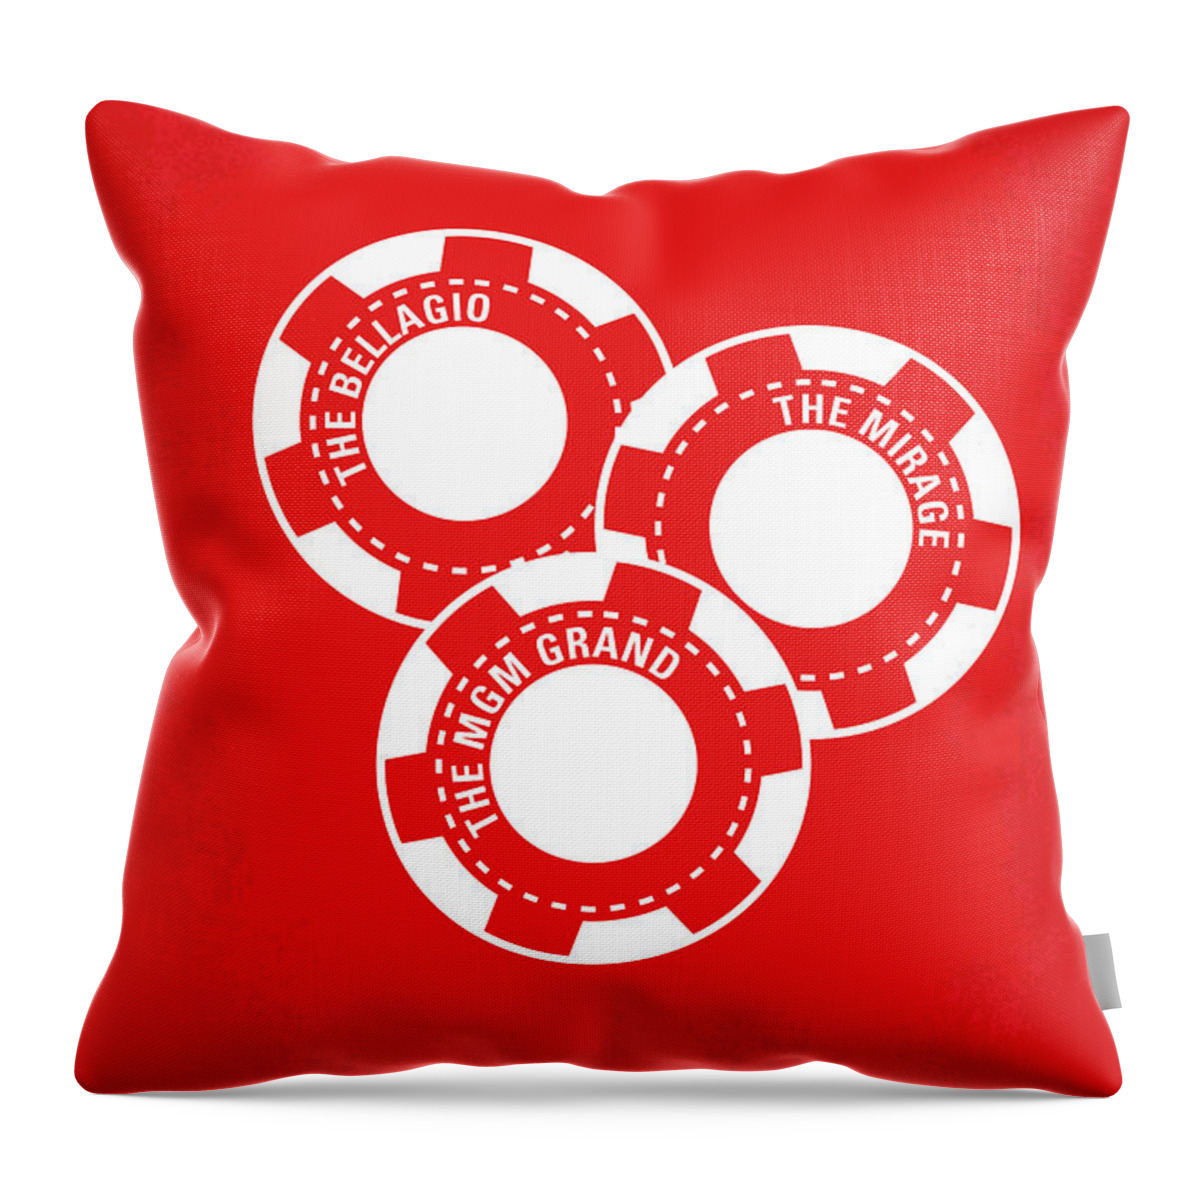 Oceans 11 Throw Pillow featuring the digital art No056 My Oceans 11 minimal movie poster by Chungkong Art